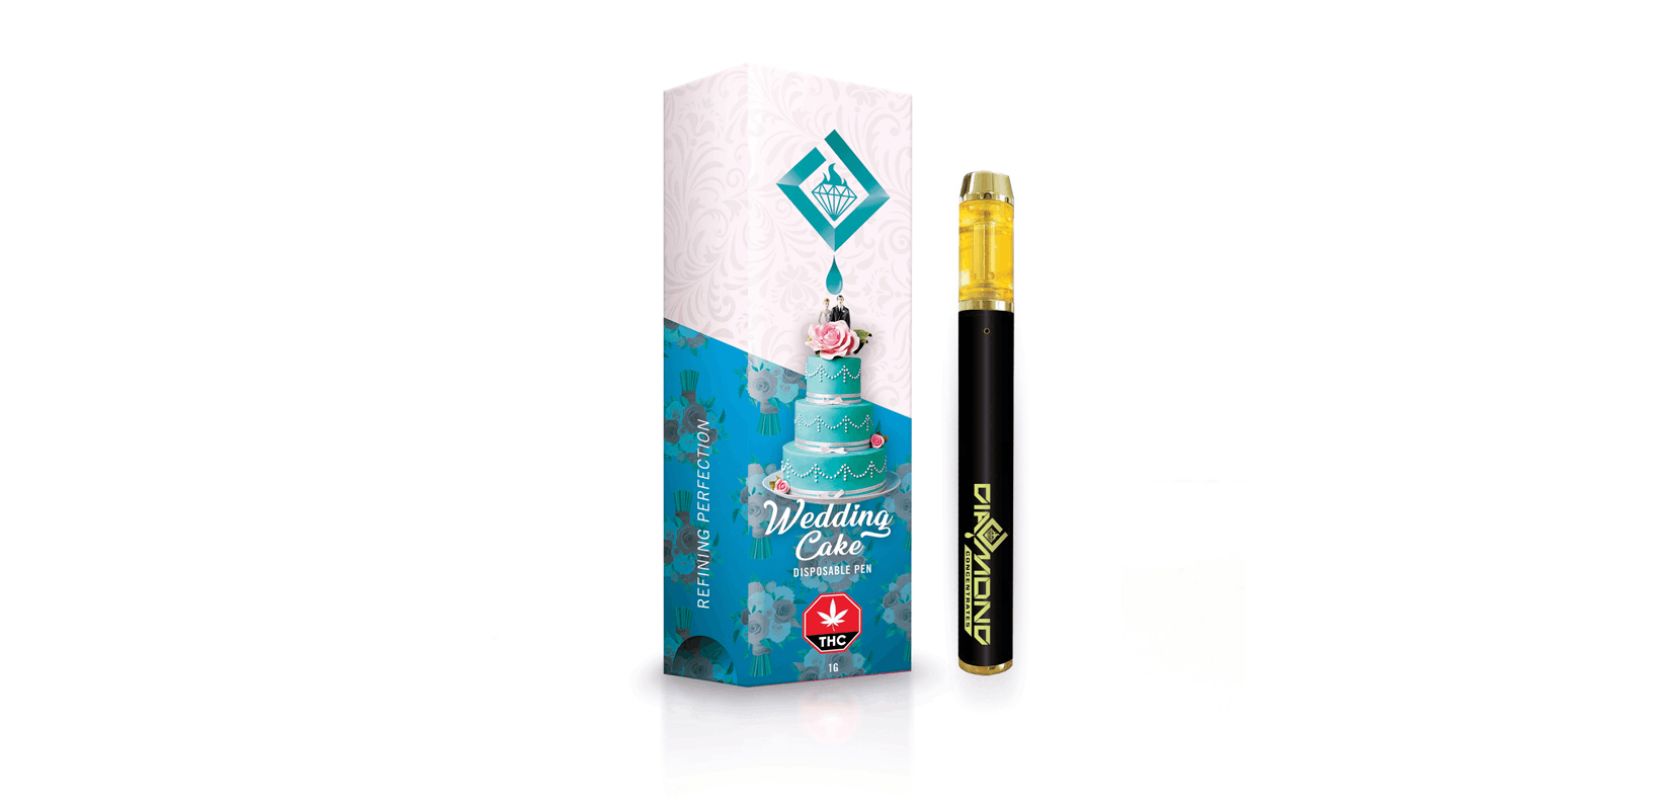 Looking for a quick and discreet way to enjoy the potent effects of the Wedding Cake strain? If so, the Diamond Concentrates – Wedding Cake Disposable Pen is an excellent option to consider. 